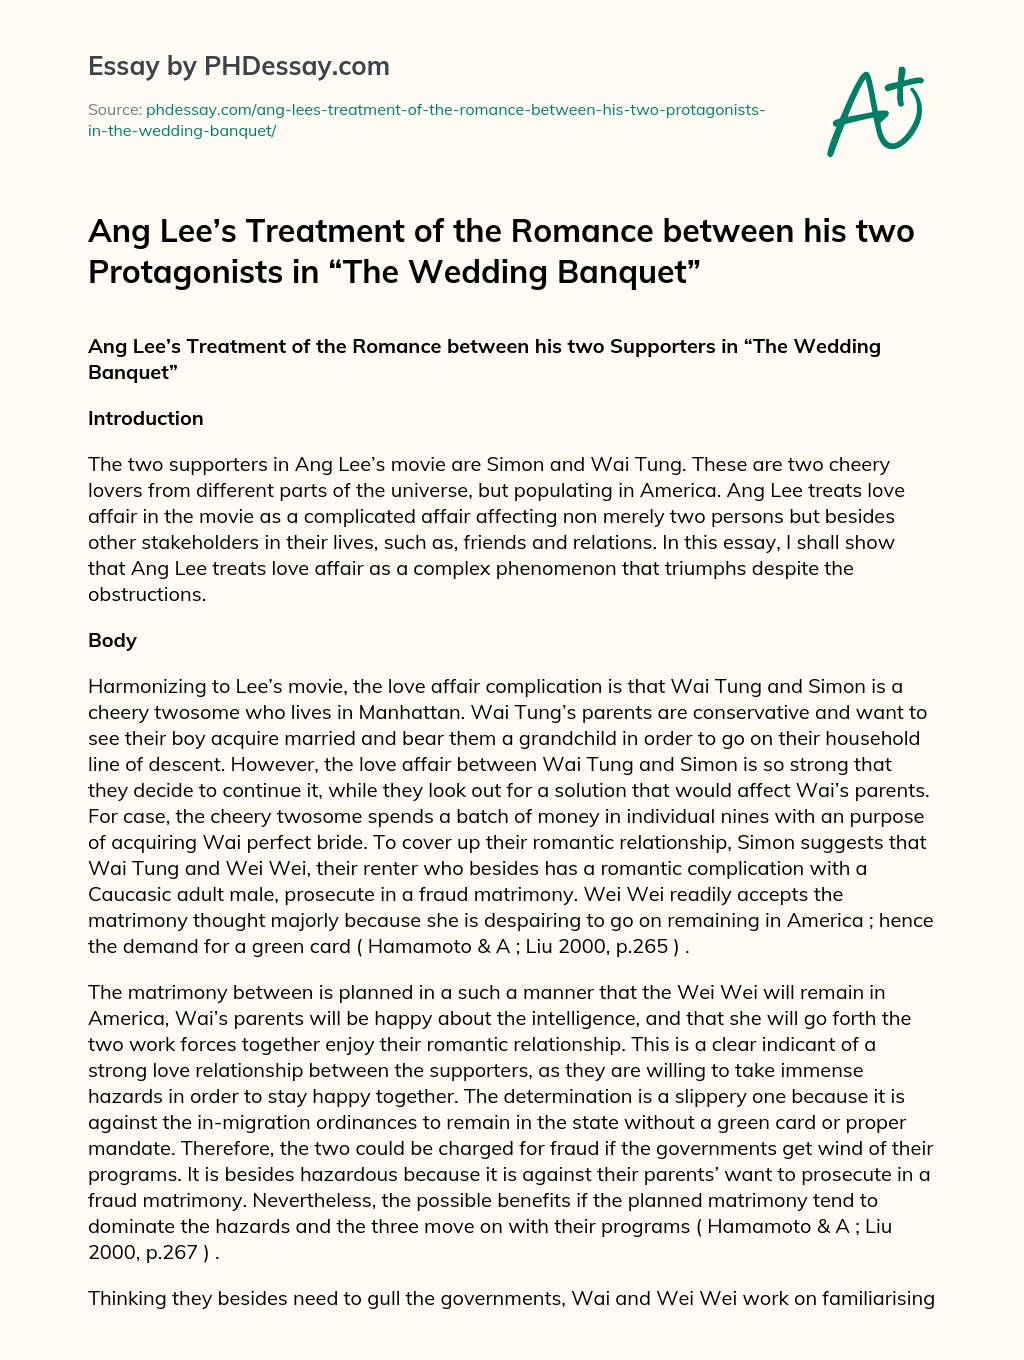 Ang Lee’s Treatment of the Romance between his two Protagonists in “The Wedding Banquet” essay